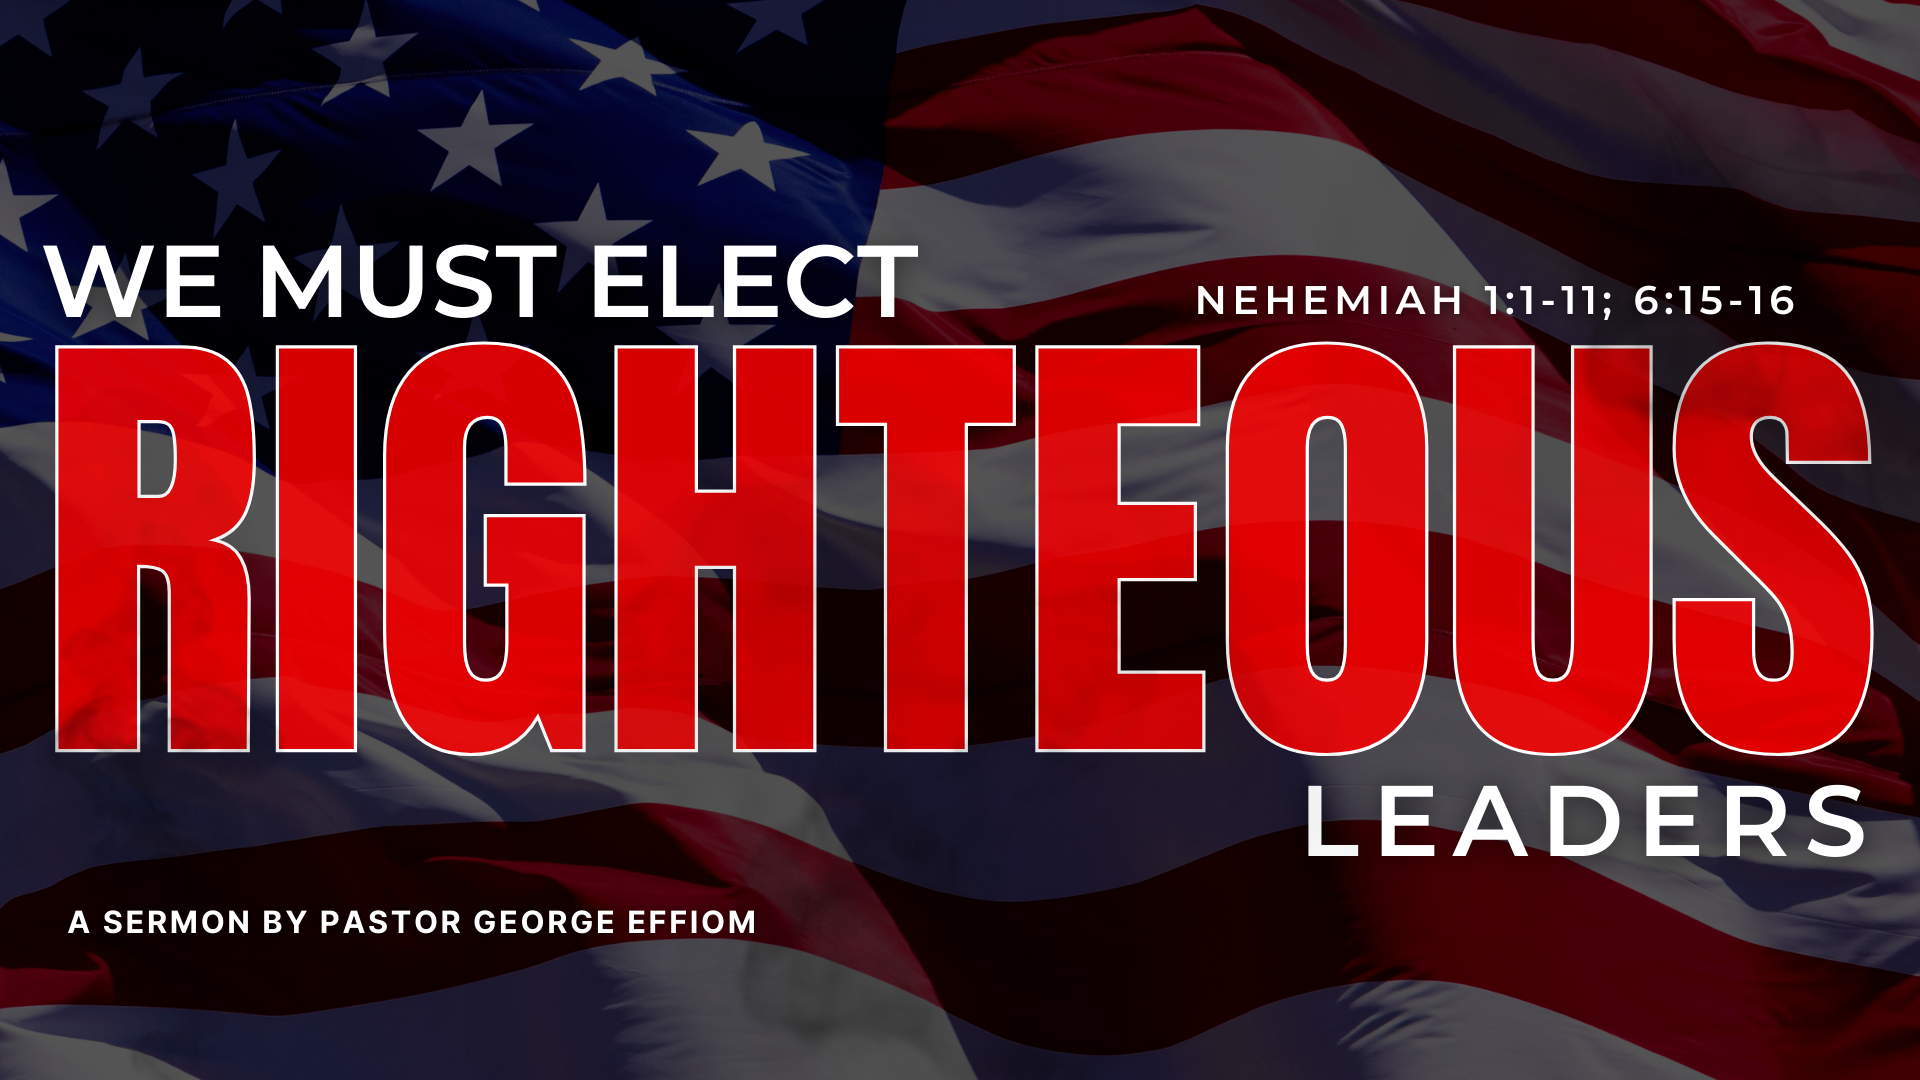 We Must Elect Righteous Leaders